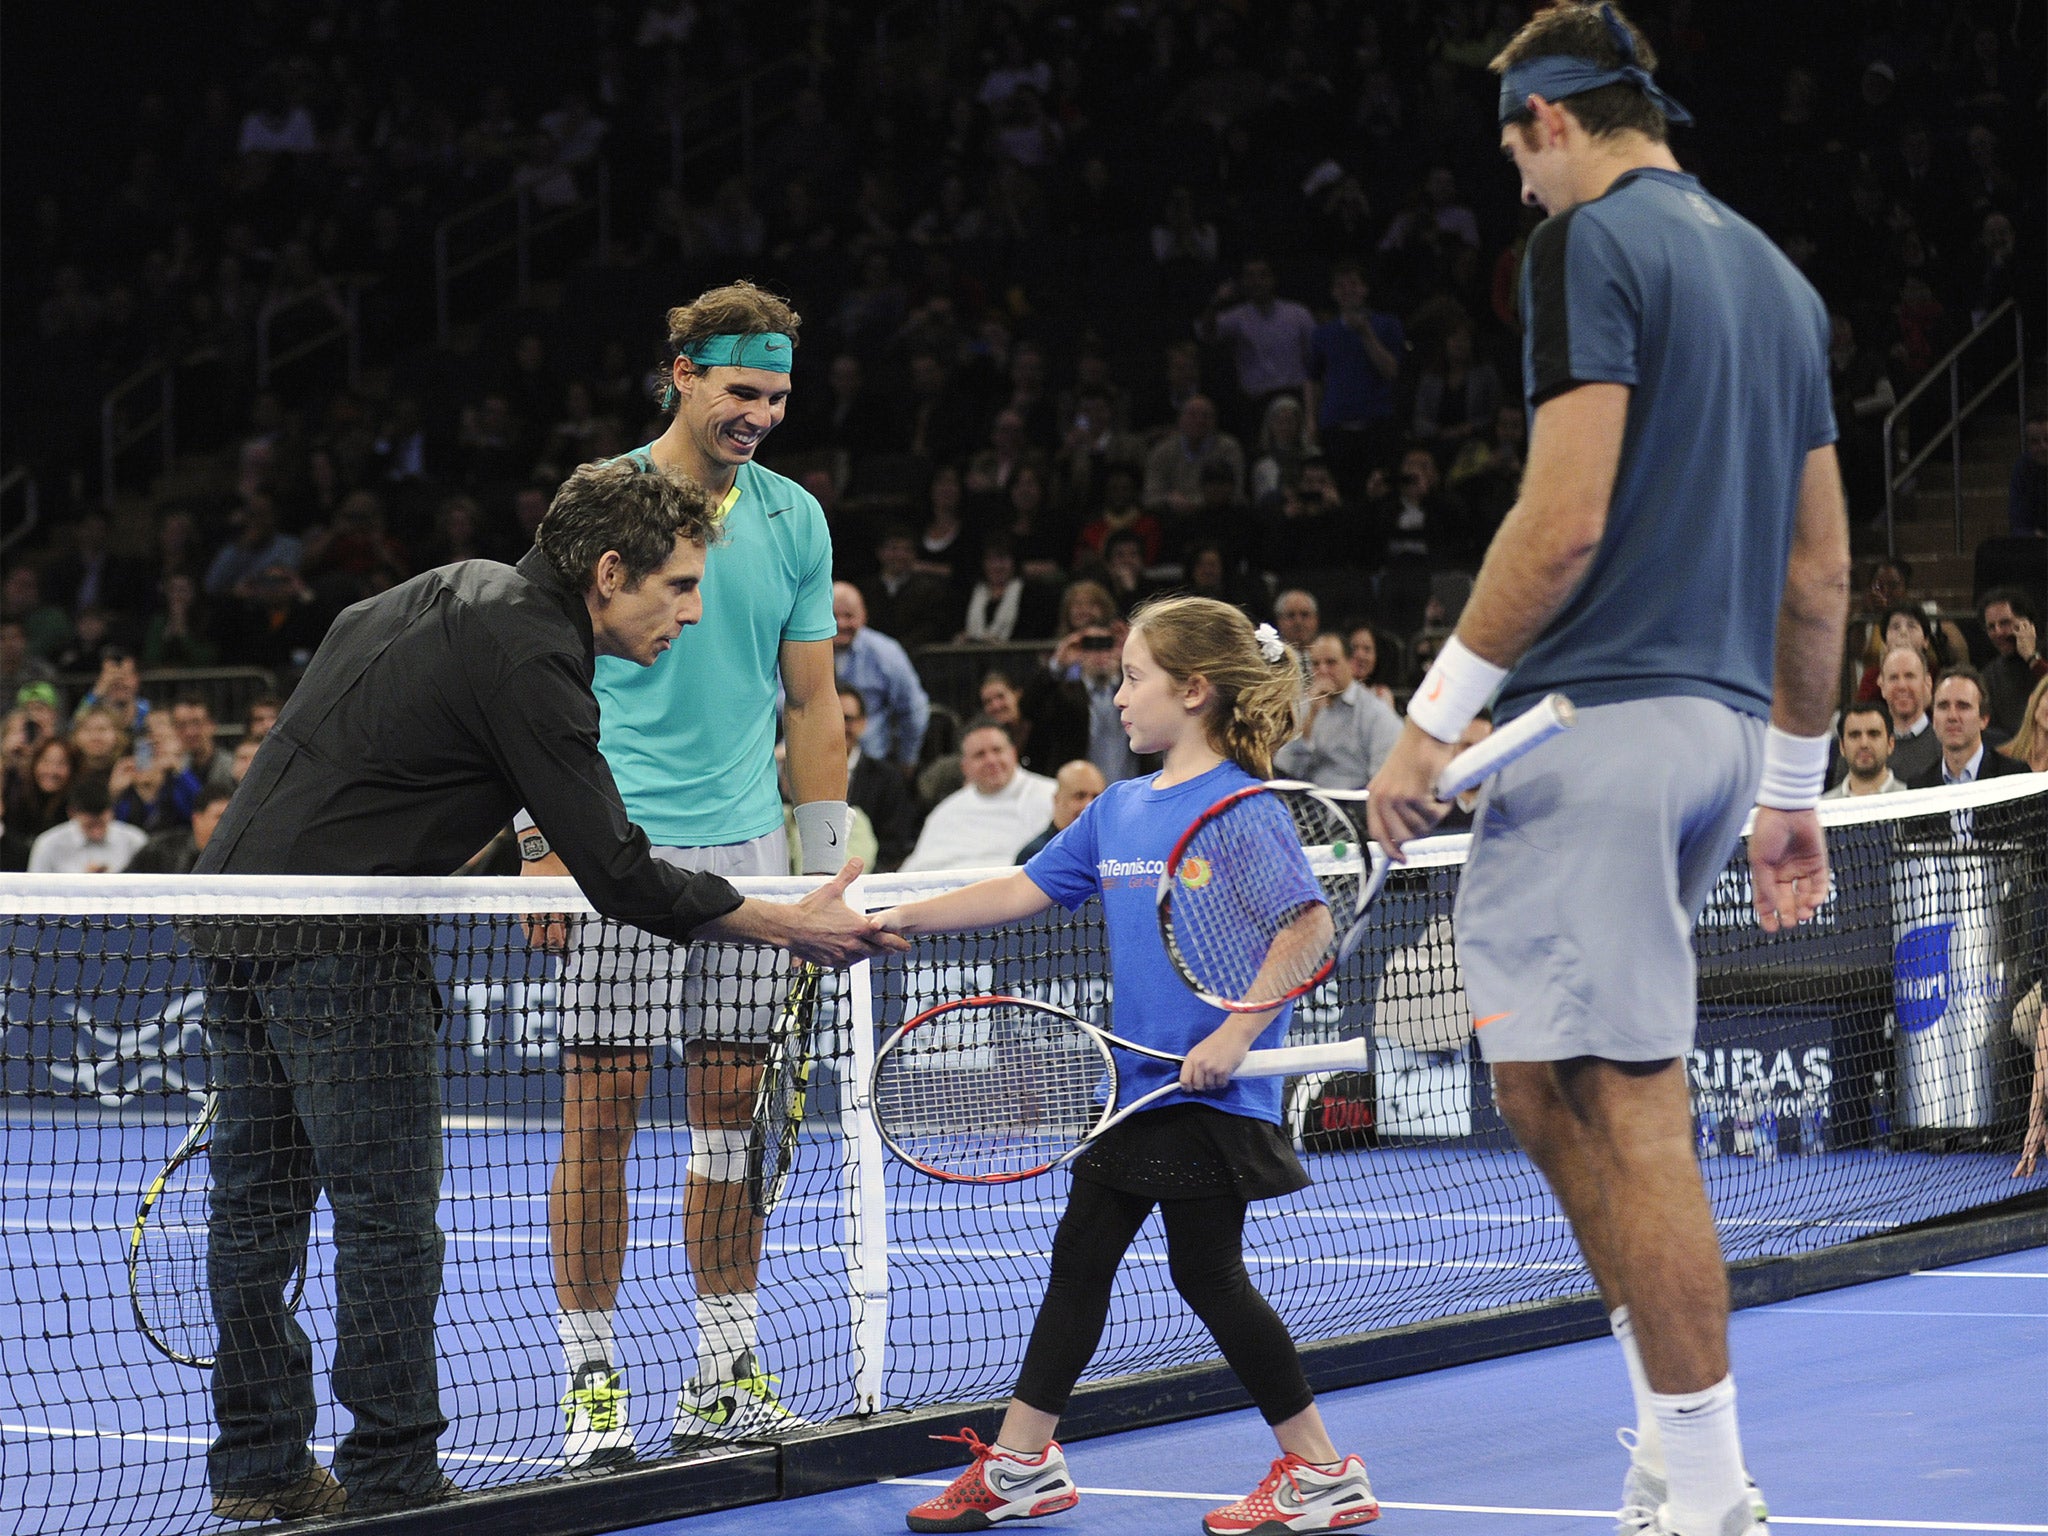 Actor Ben Stiller shakes hands with nine-year-old Rebecca Suarez as their doubles partners, Rafael Nadal and Juan Martin del Potro, look on